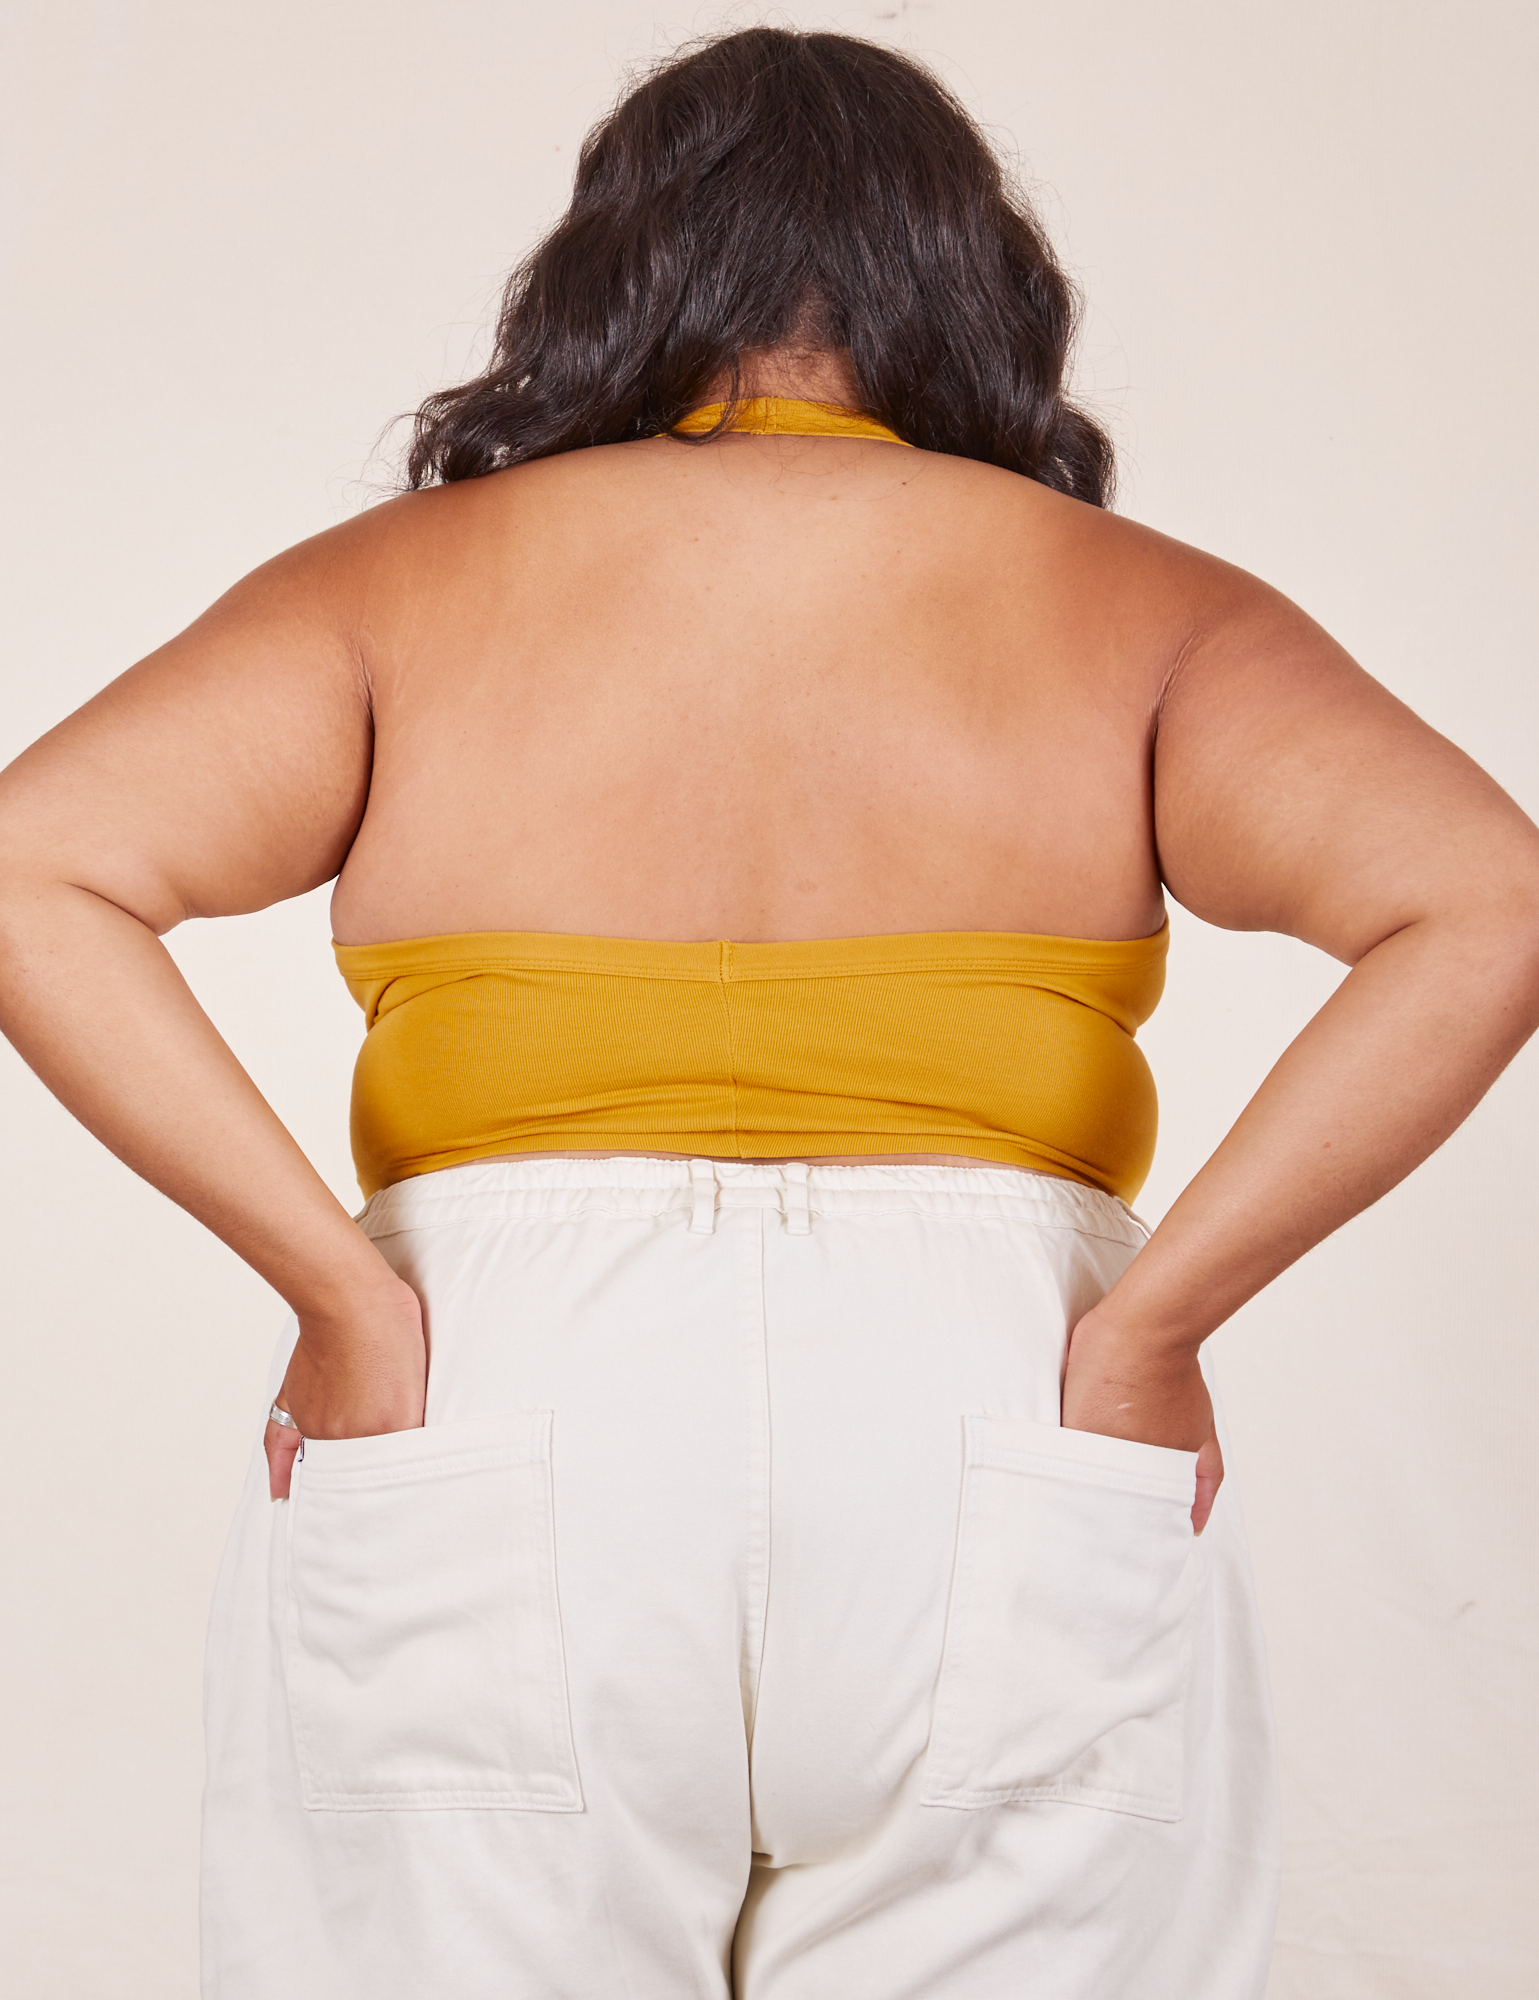 Back view of Halter Top in Mustard Yellow and vintage off-white Western Pants worn by Alicia. She has both of her hands in the back pant pockets.